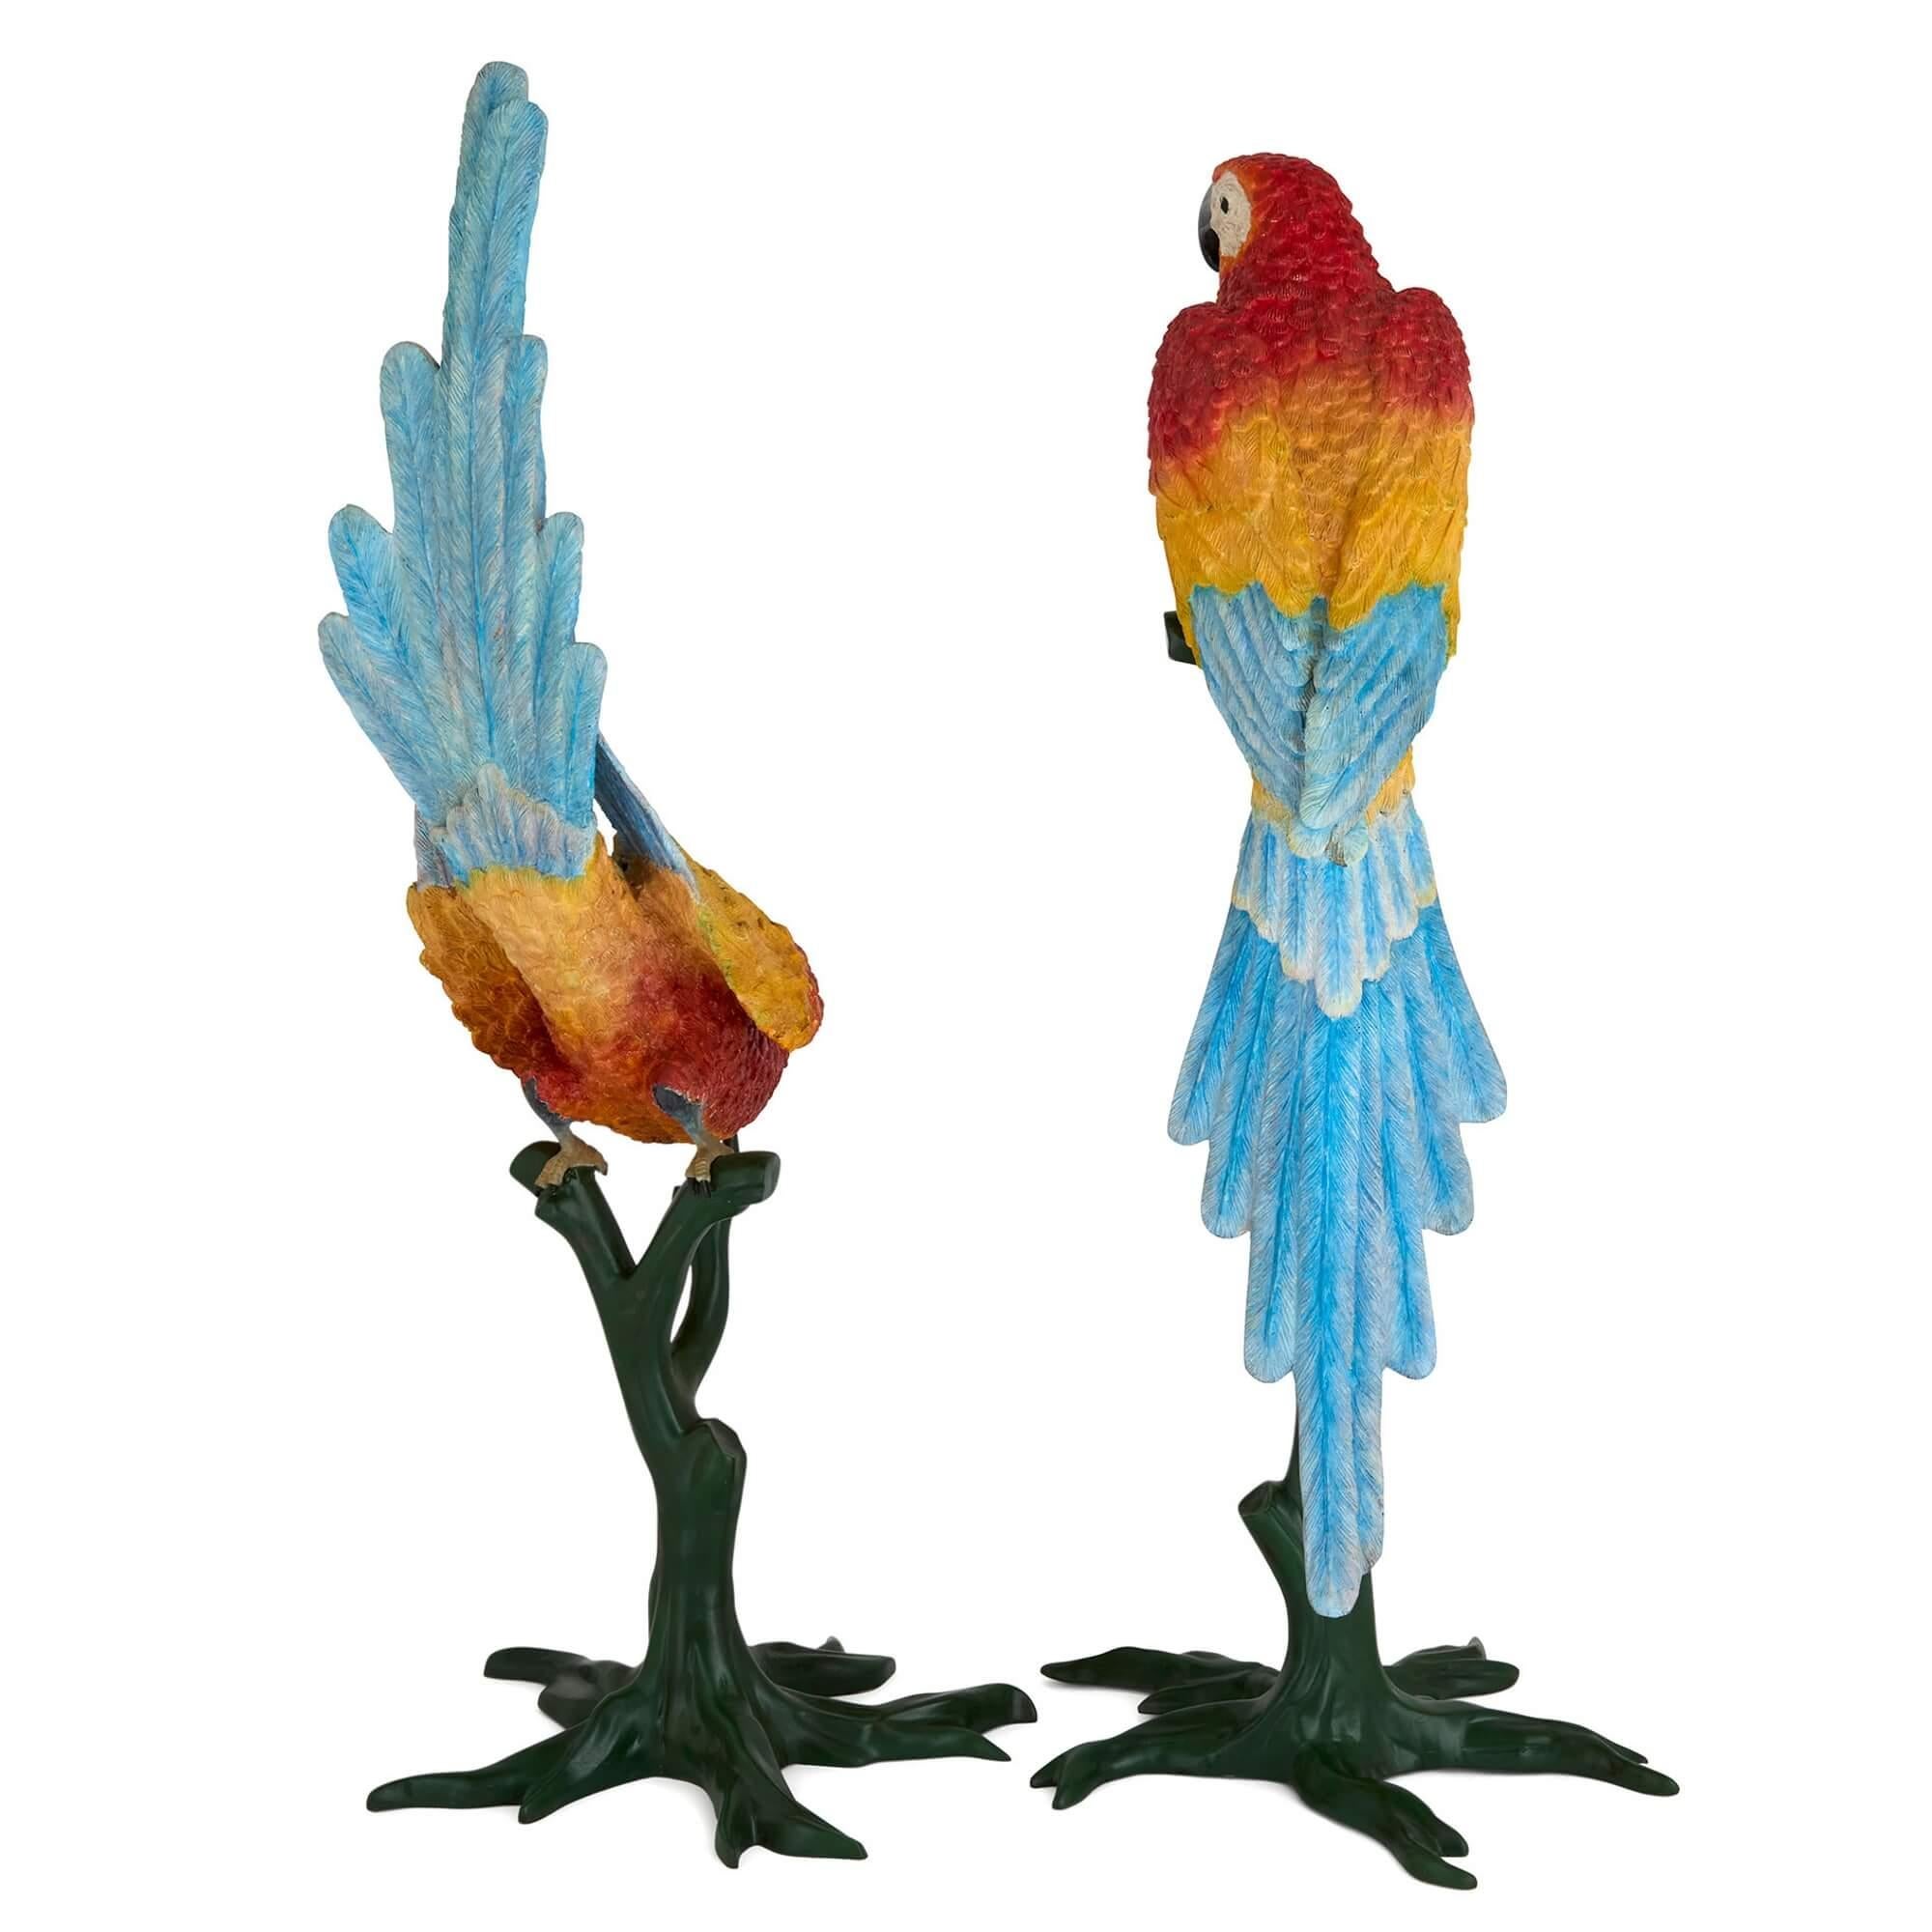 Pair of life-size painted bronze parrots 
Continental, 20th Century
Tallest: Height 141cm, width 50cm, depth 50cm
Smallest: Height 131cm, width 53cm, depth 50cm

Of a very impressive size, this charming pair of painted bronze parrots showcase the